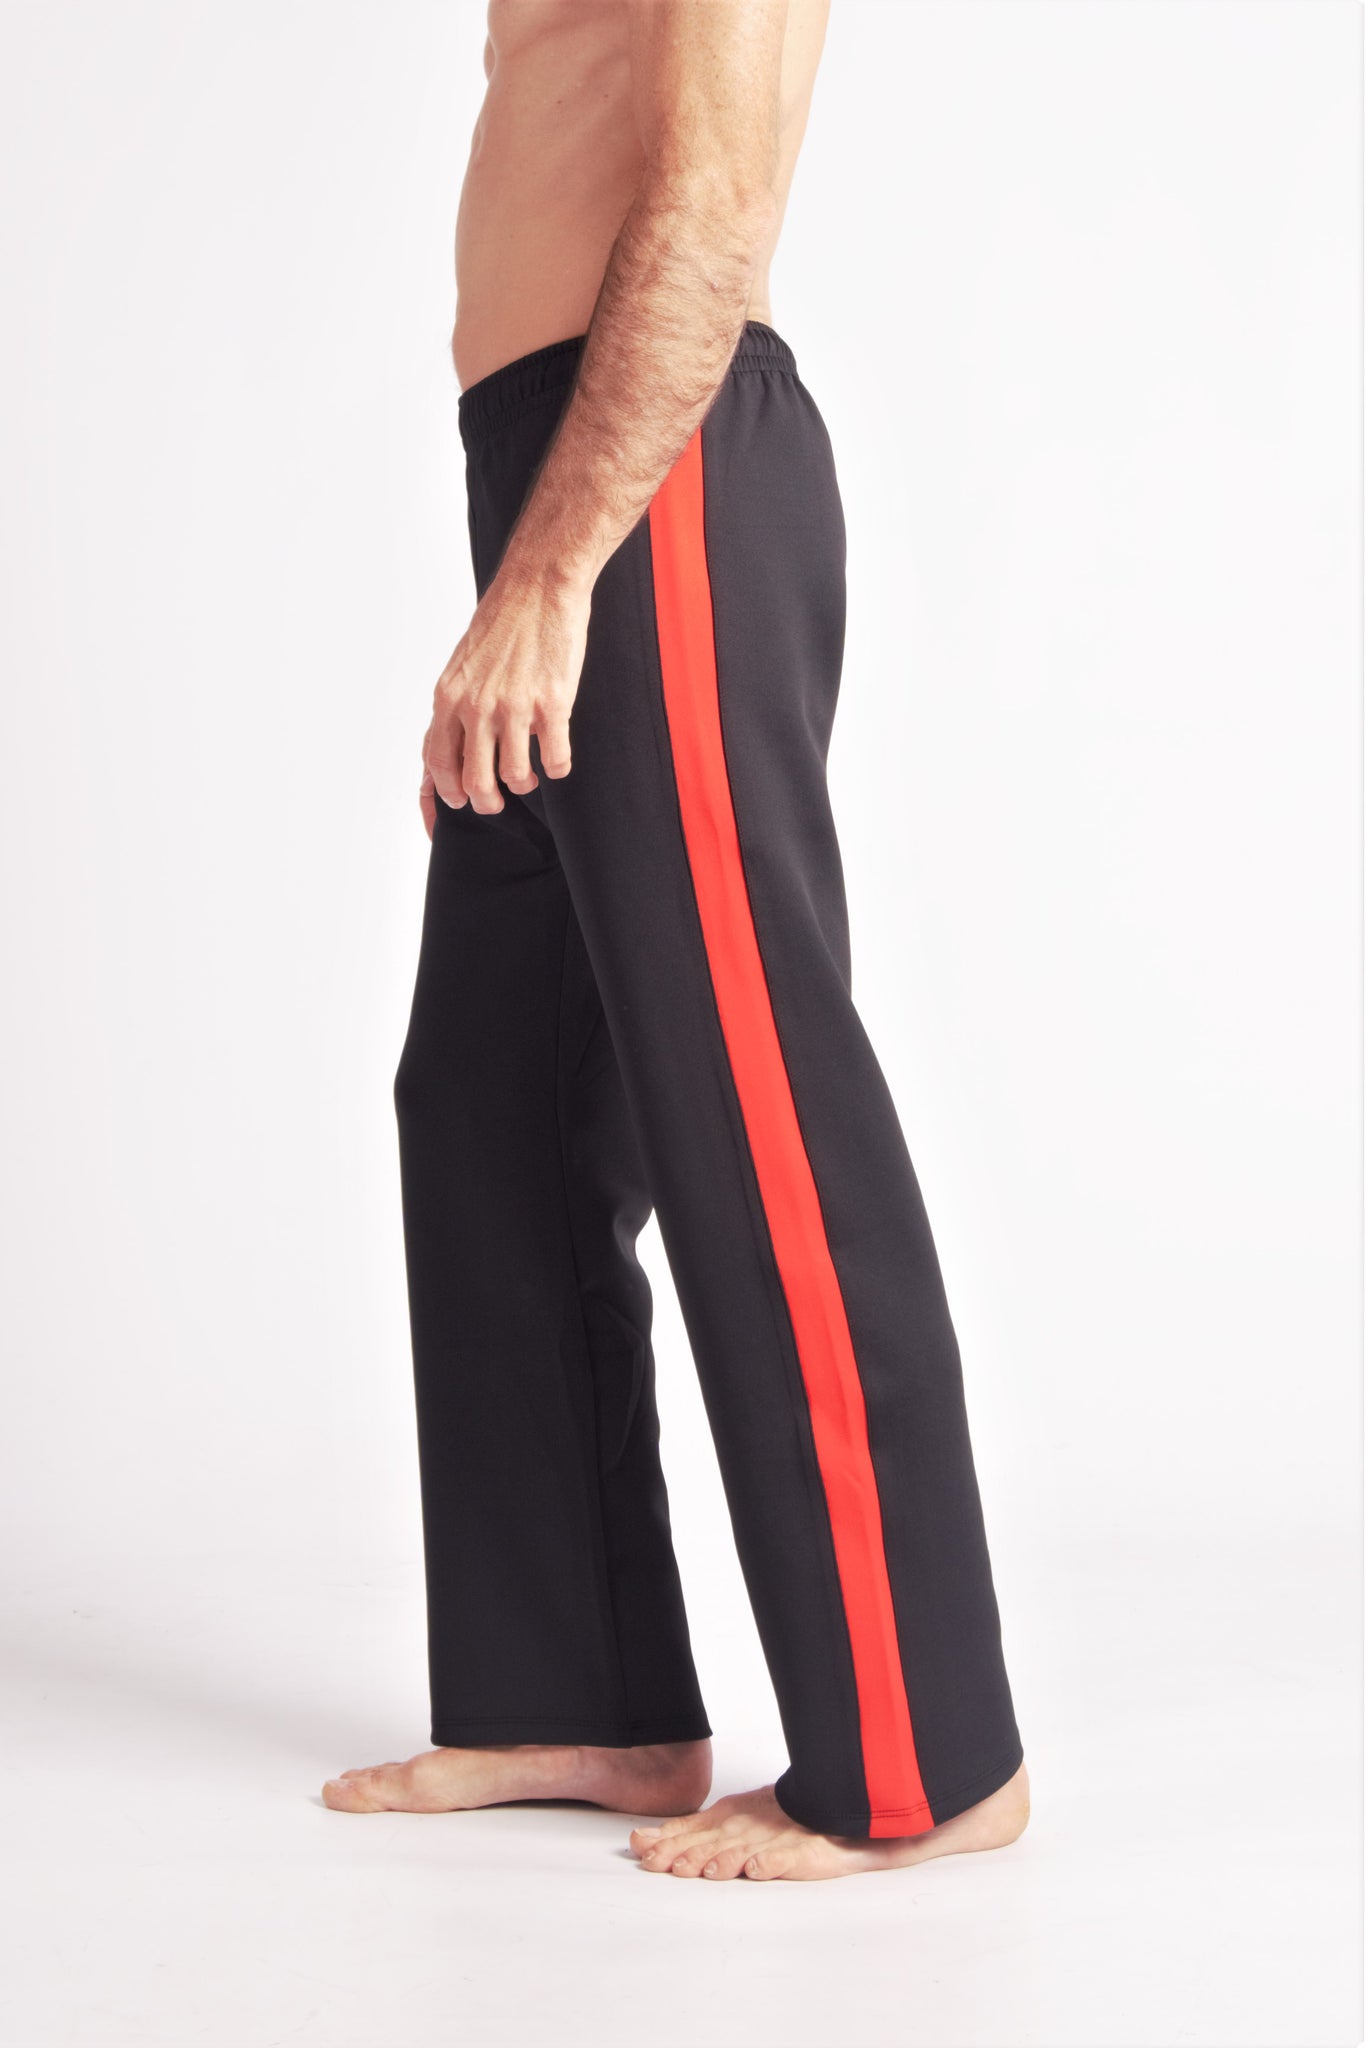 Flying Contemporary Dance Pants - Black & Red / EMotionBodiesBrand – E  Motion Bodies Brand